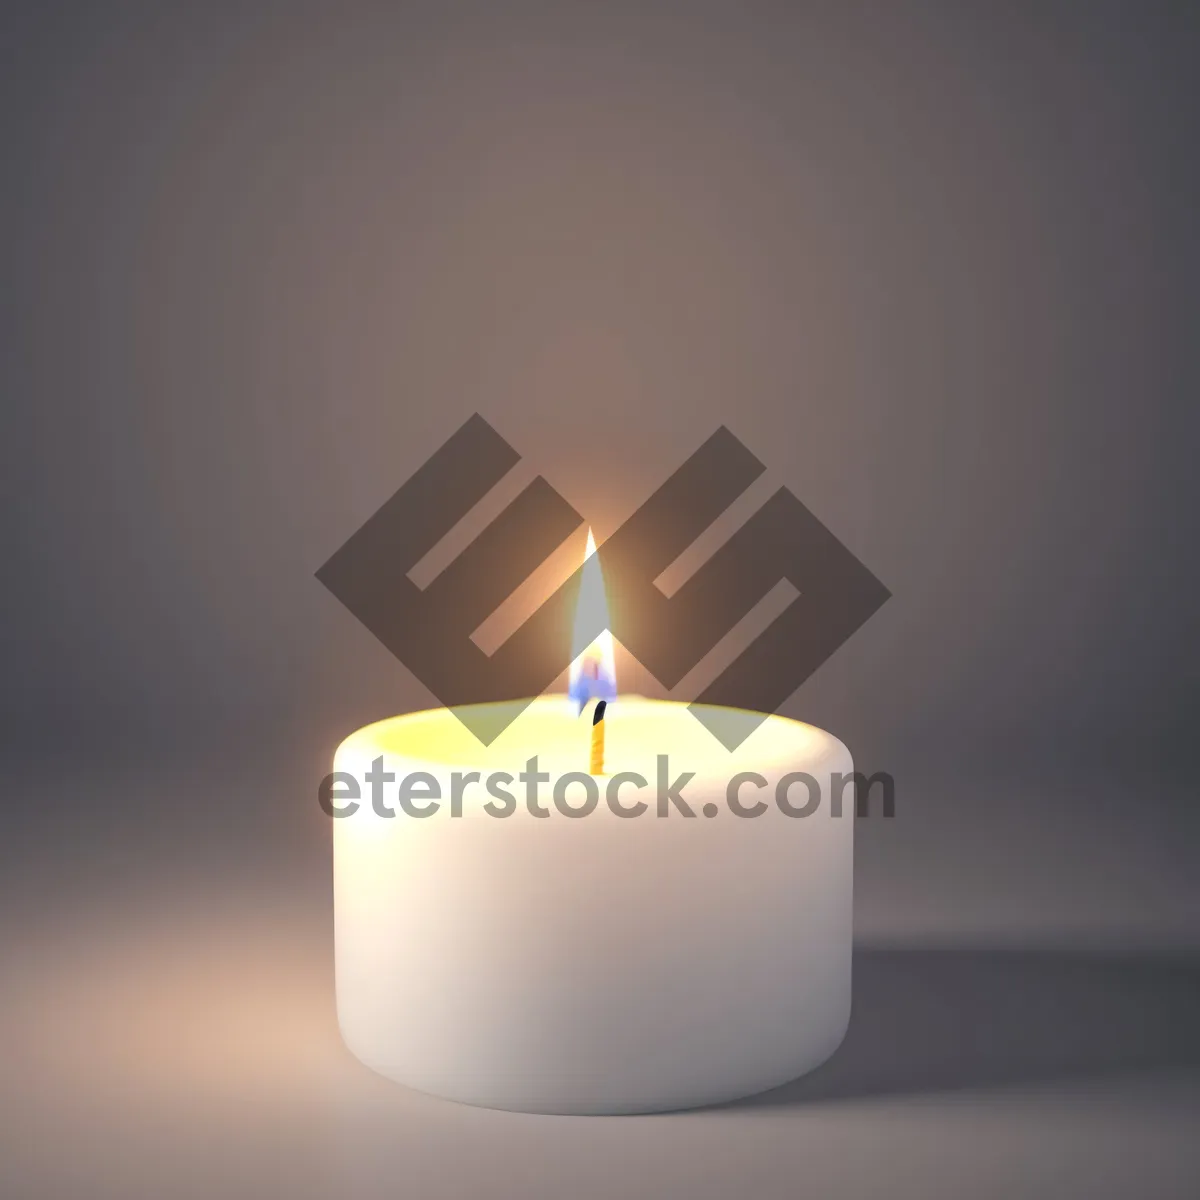 Picture of Burning Candle - Illuminating Flame for Decoration